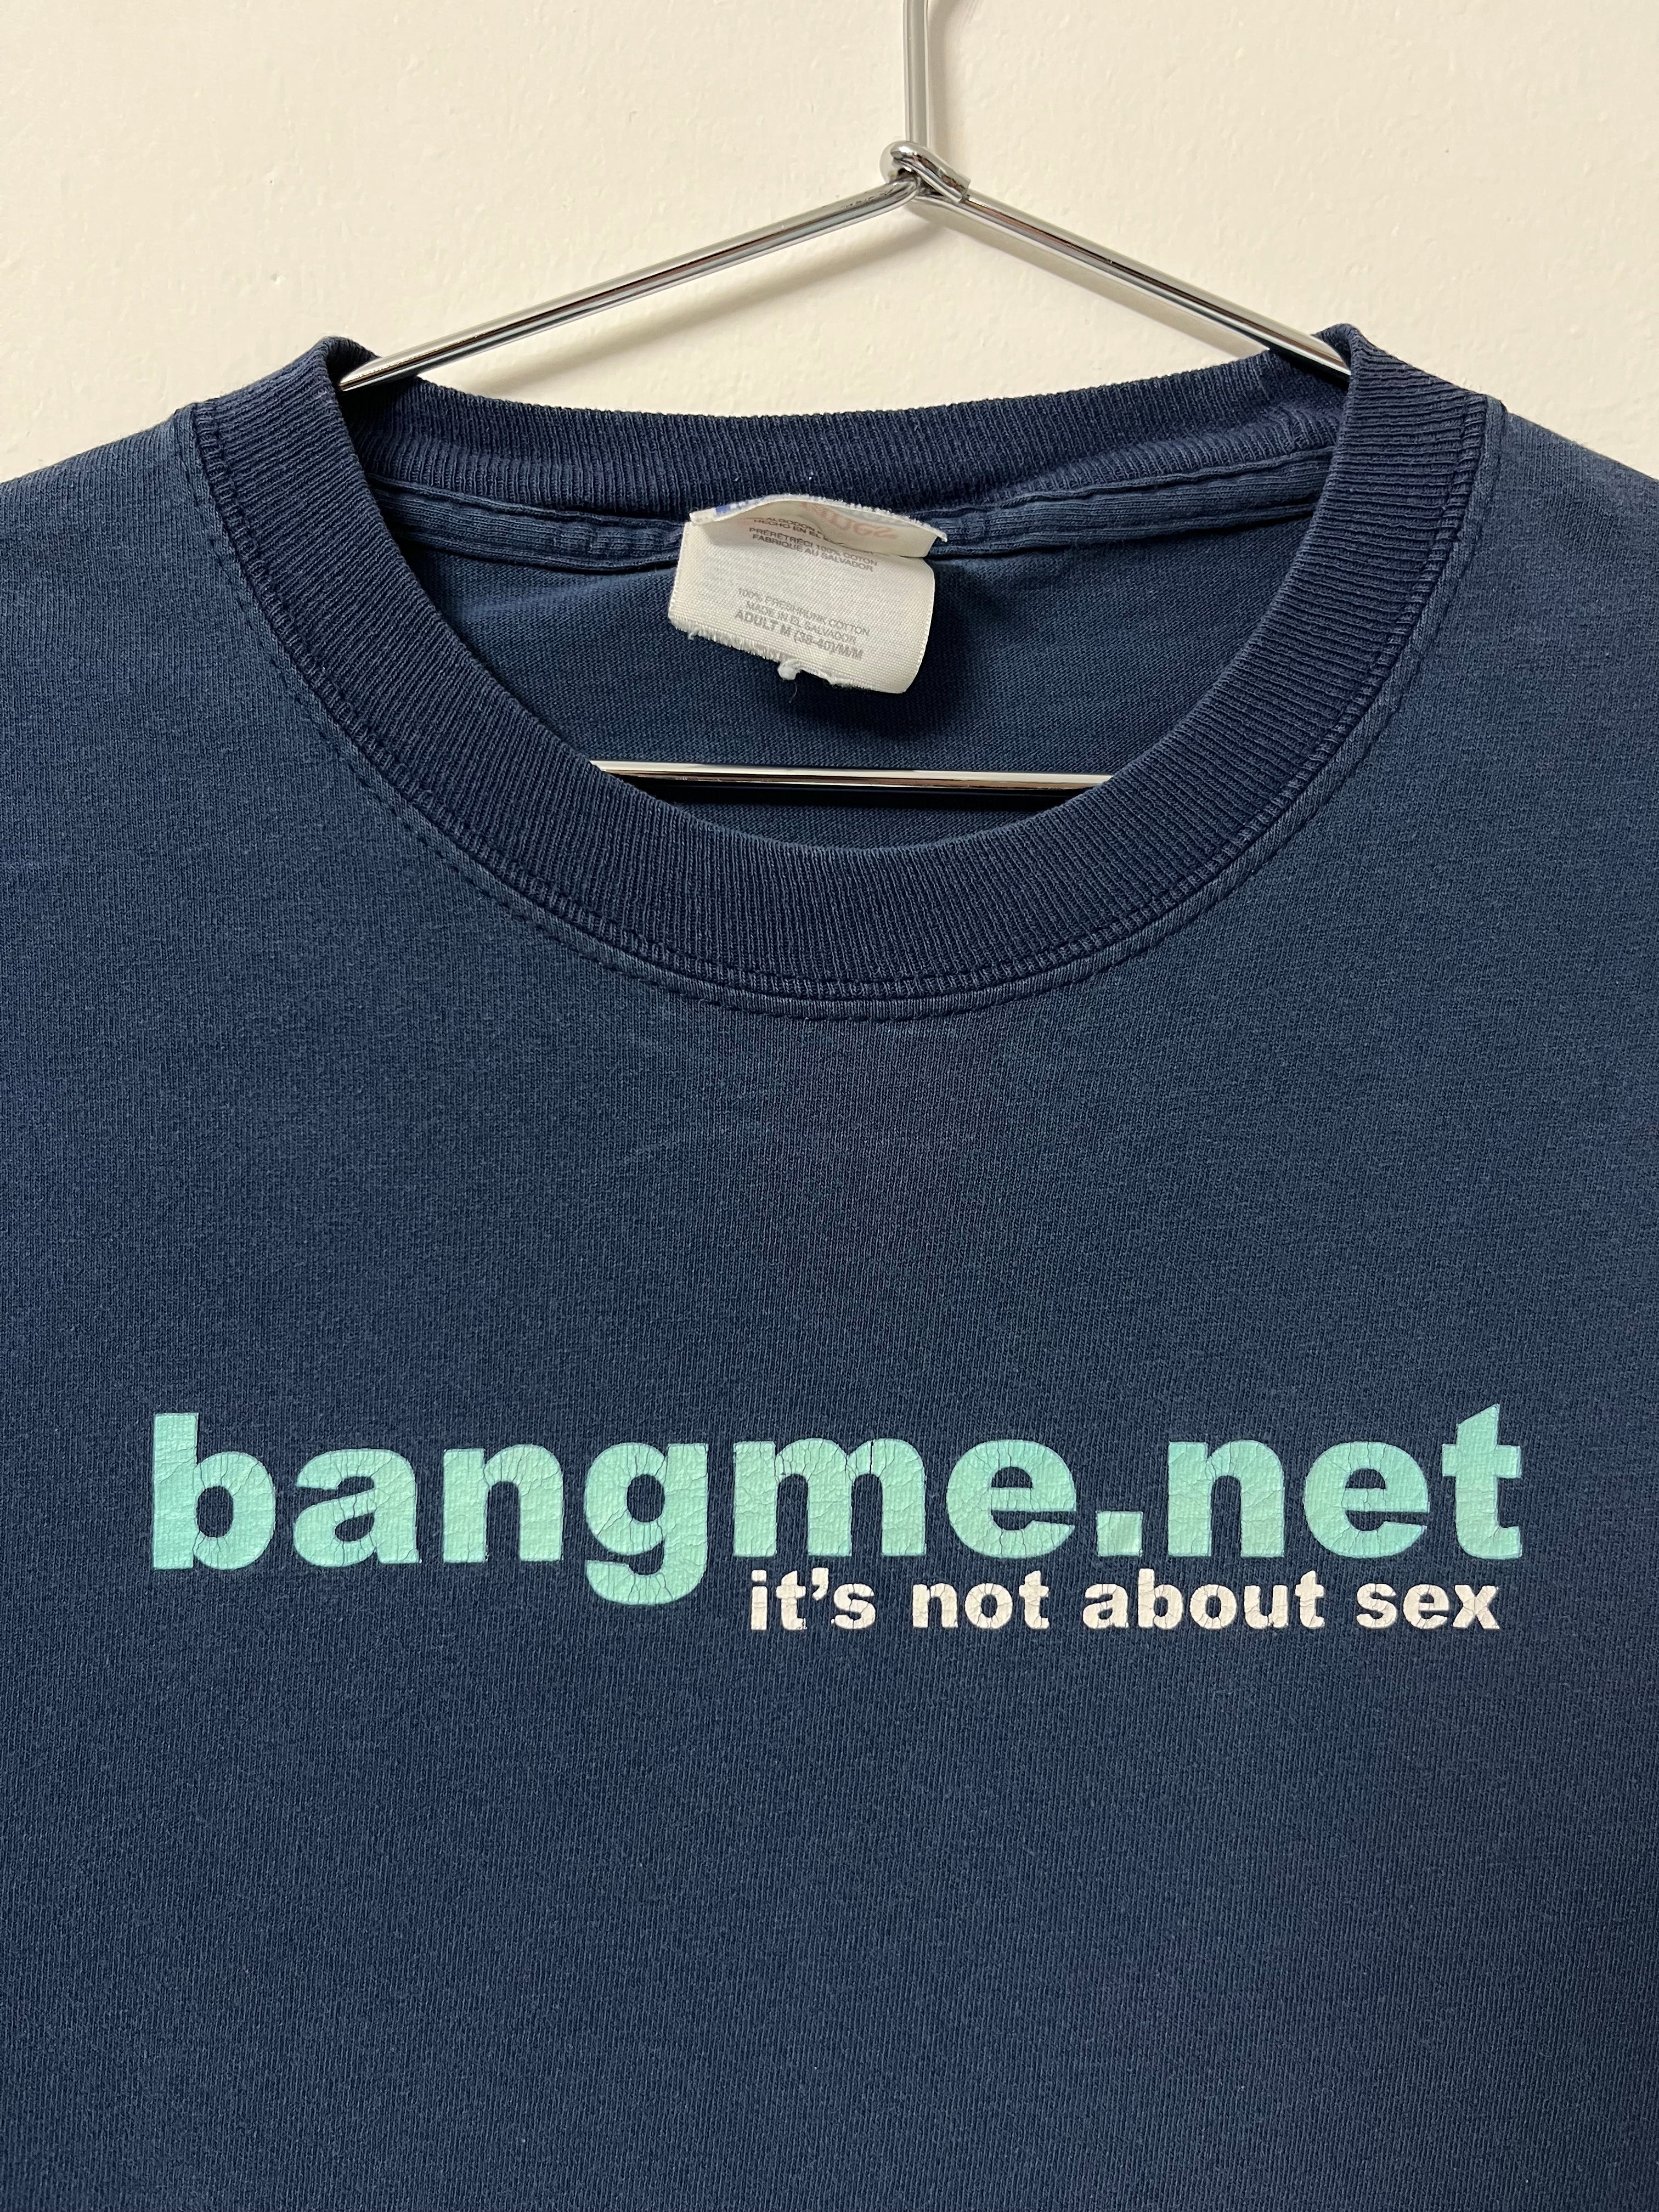 Late 90s ‘Bangme.net’ Novelty T-Shirt - Faded Navy - M